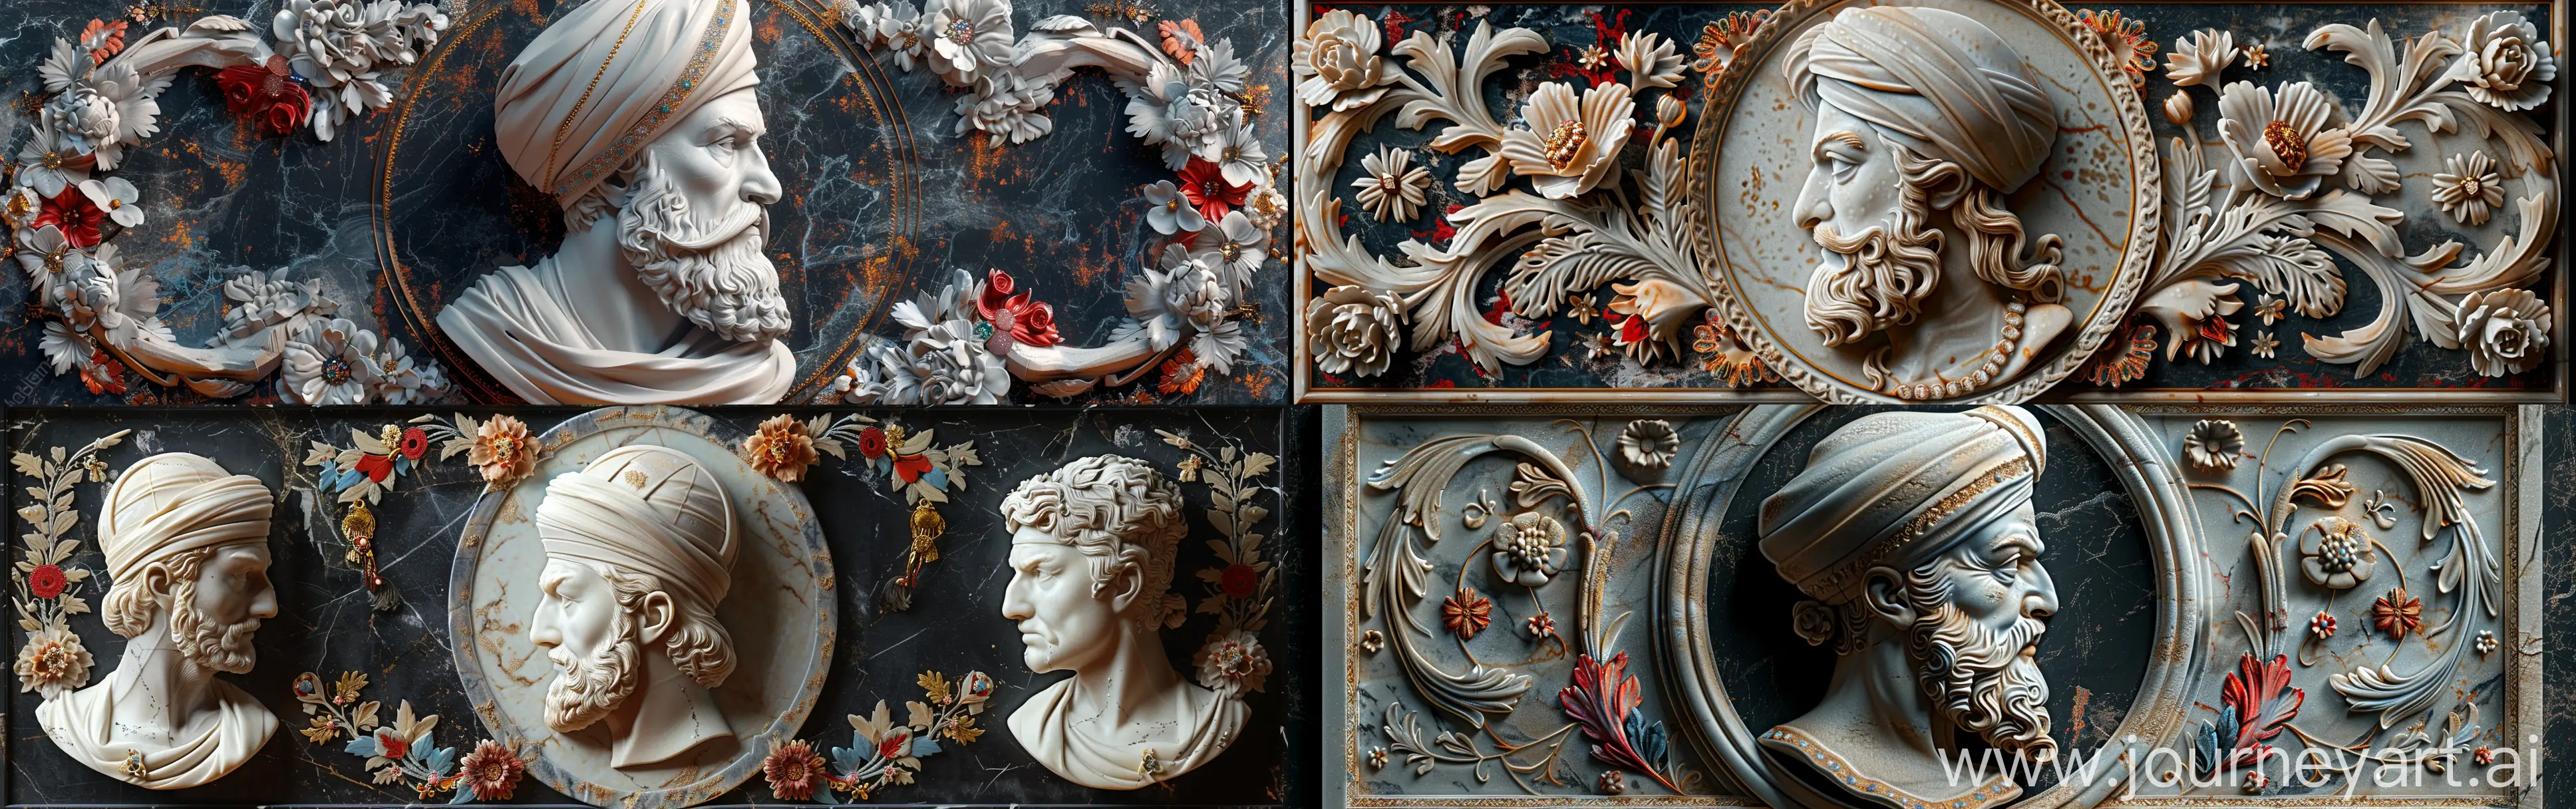 Elegant-Ottoman-Sultan-Marble-Relief-Artwork-with-Floral-Motifs